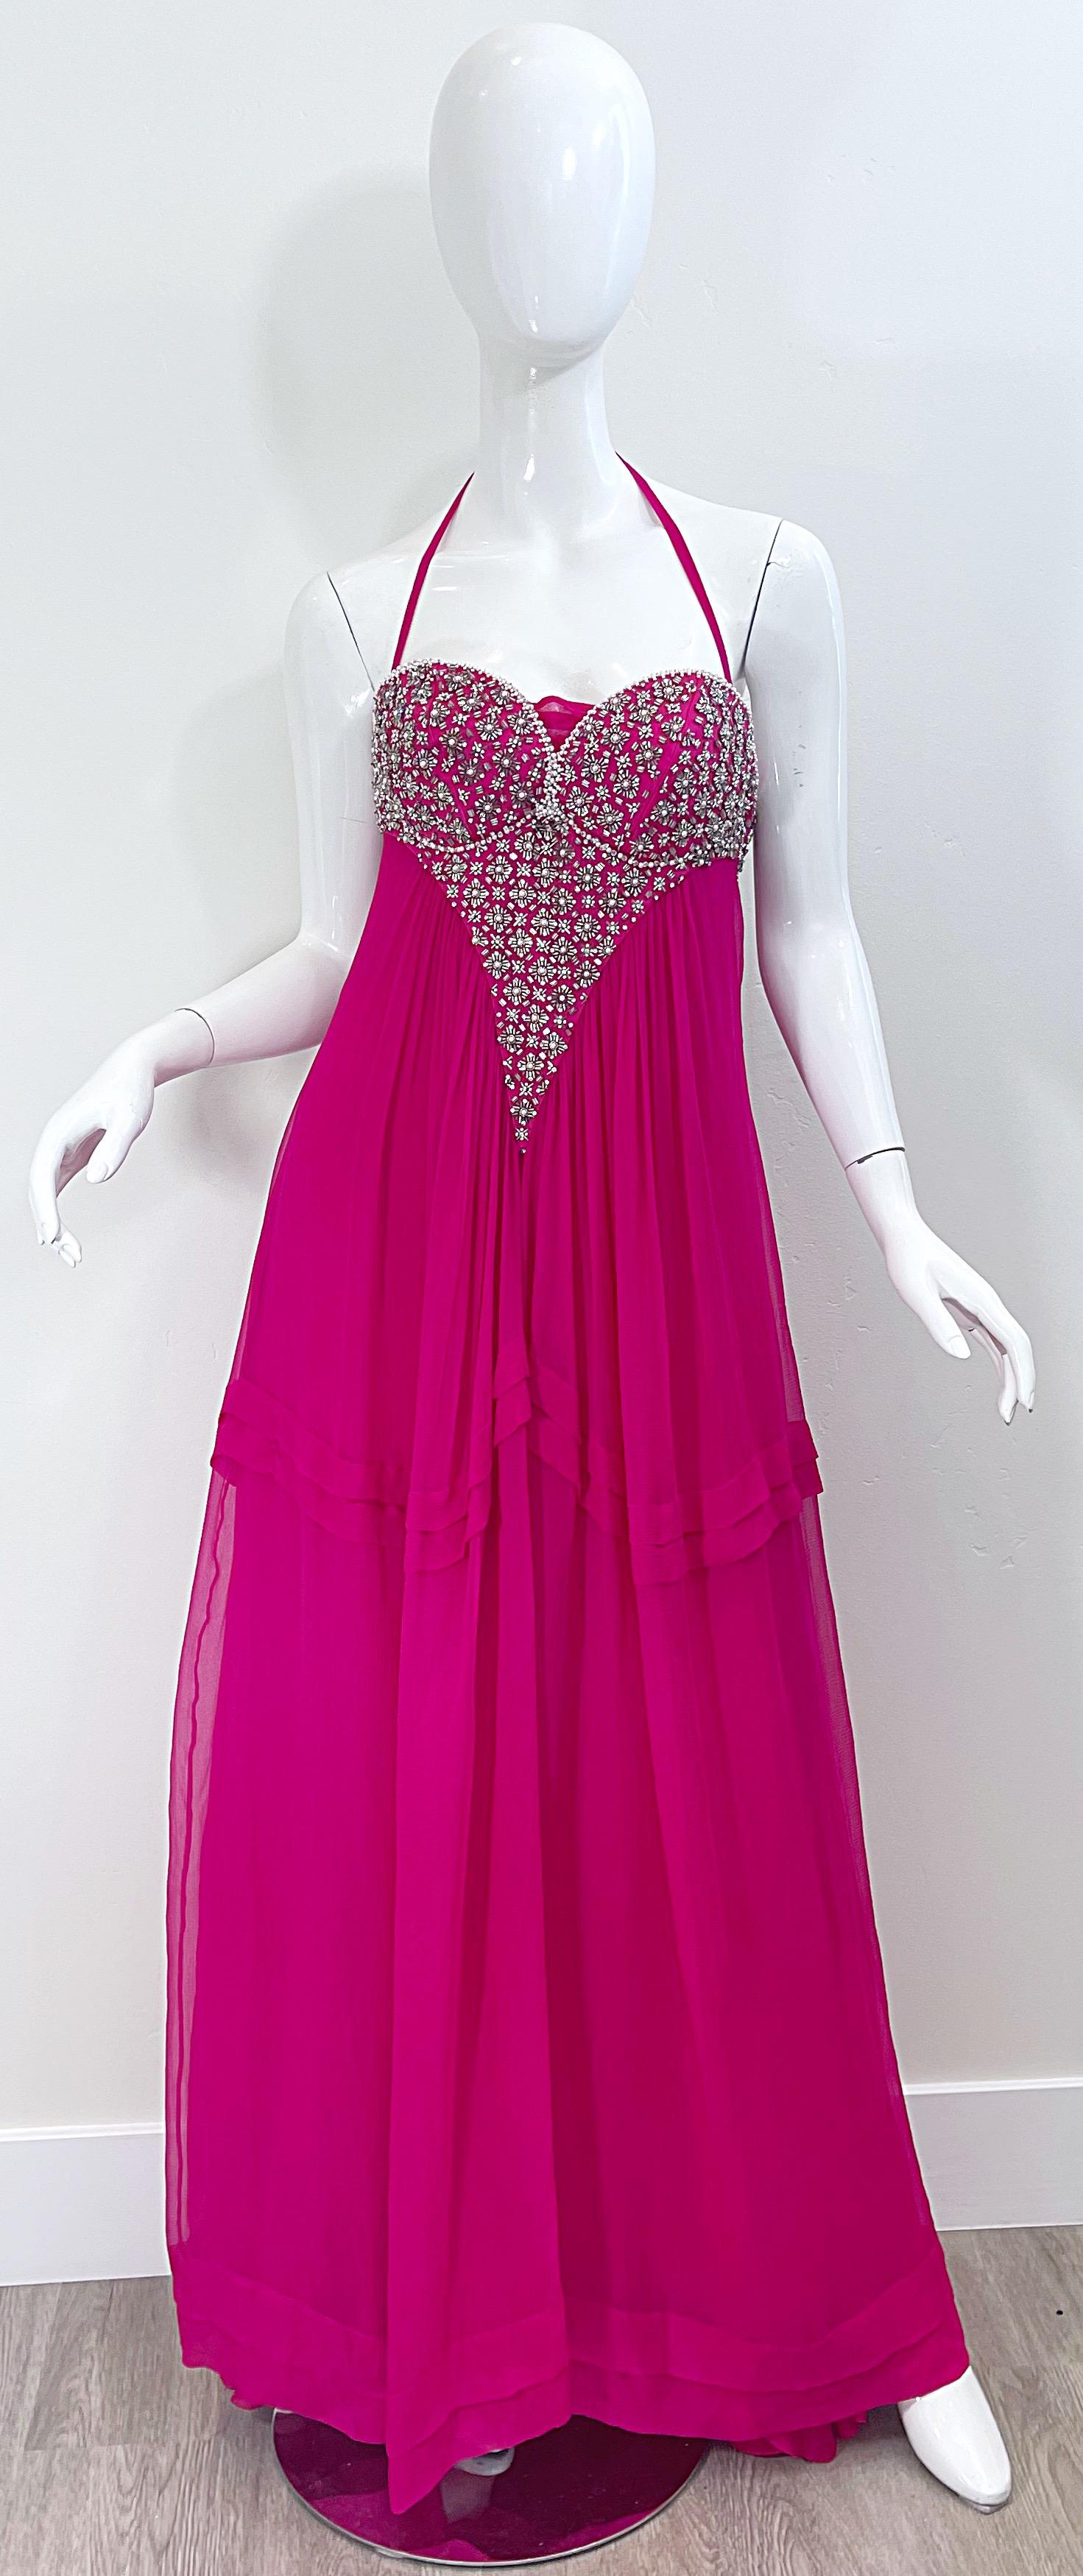 1990s Roberto Cavalli Size 44 / US 8 Hot Pink Chiffon Beaded Rhinestone 90s Gown For Sale 9